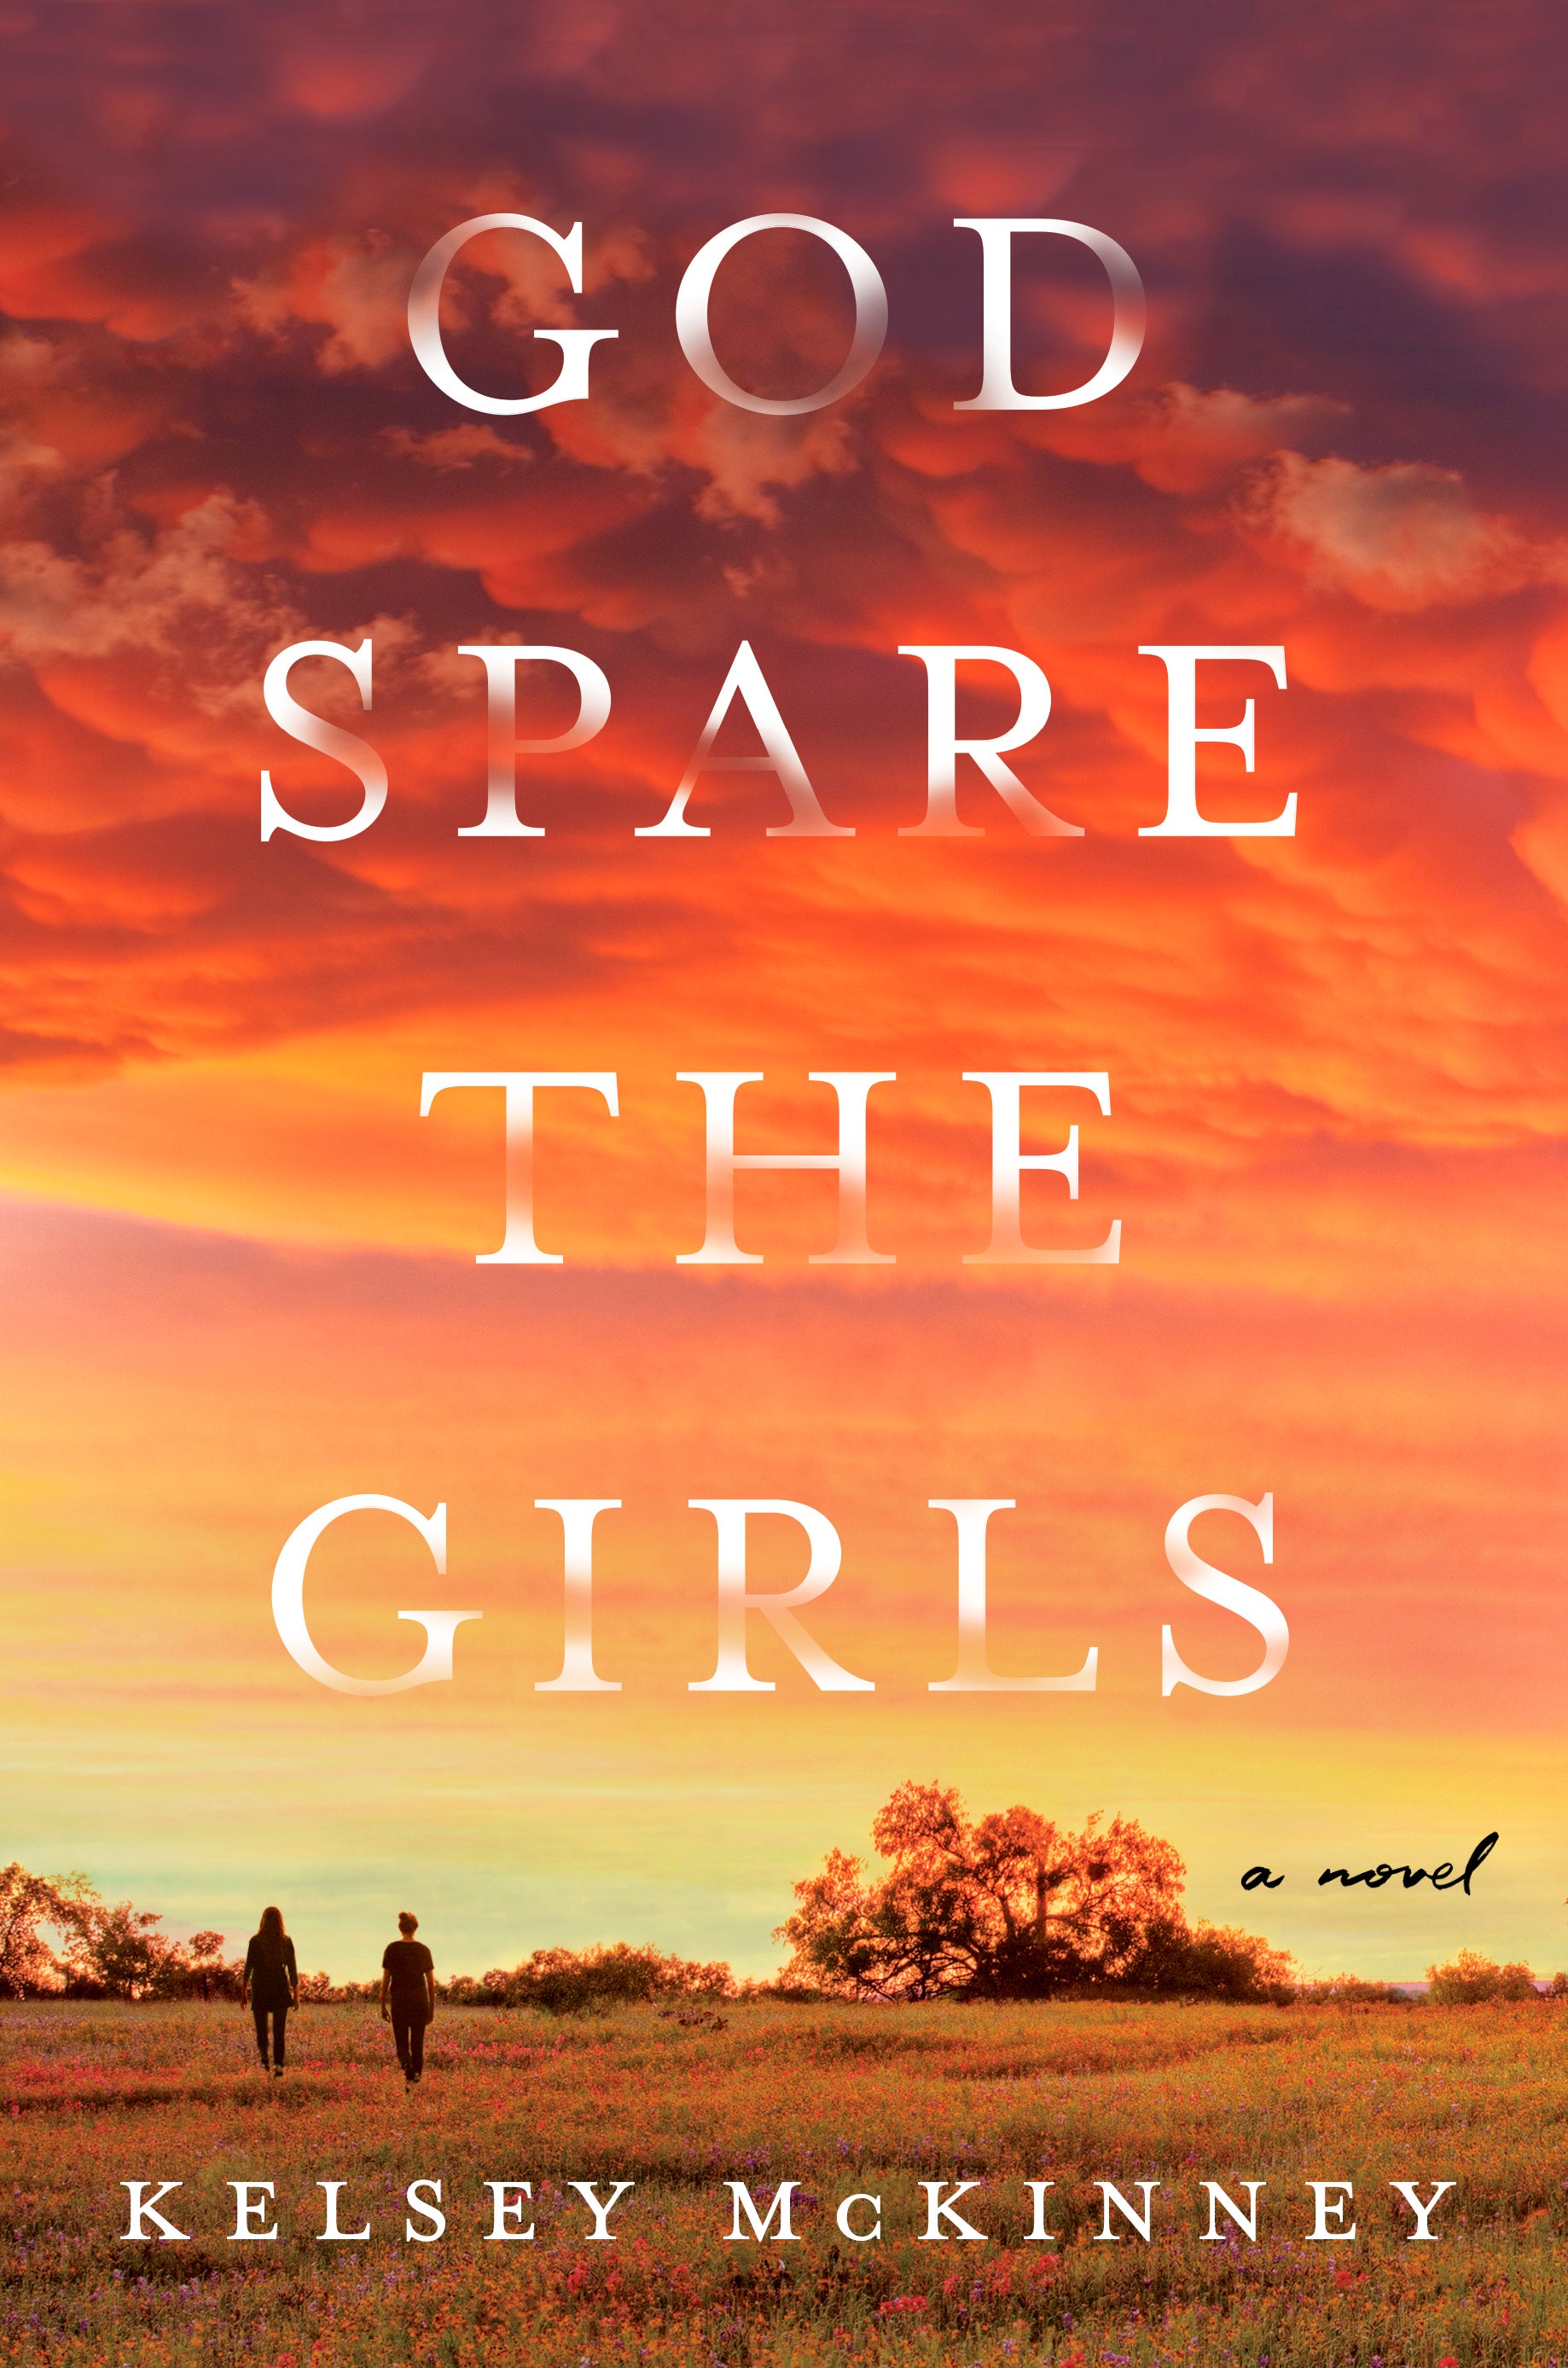 Book Review - God Spare the Girls